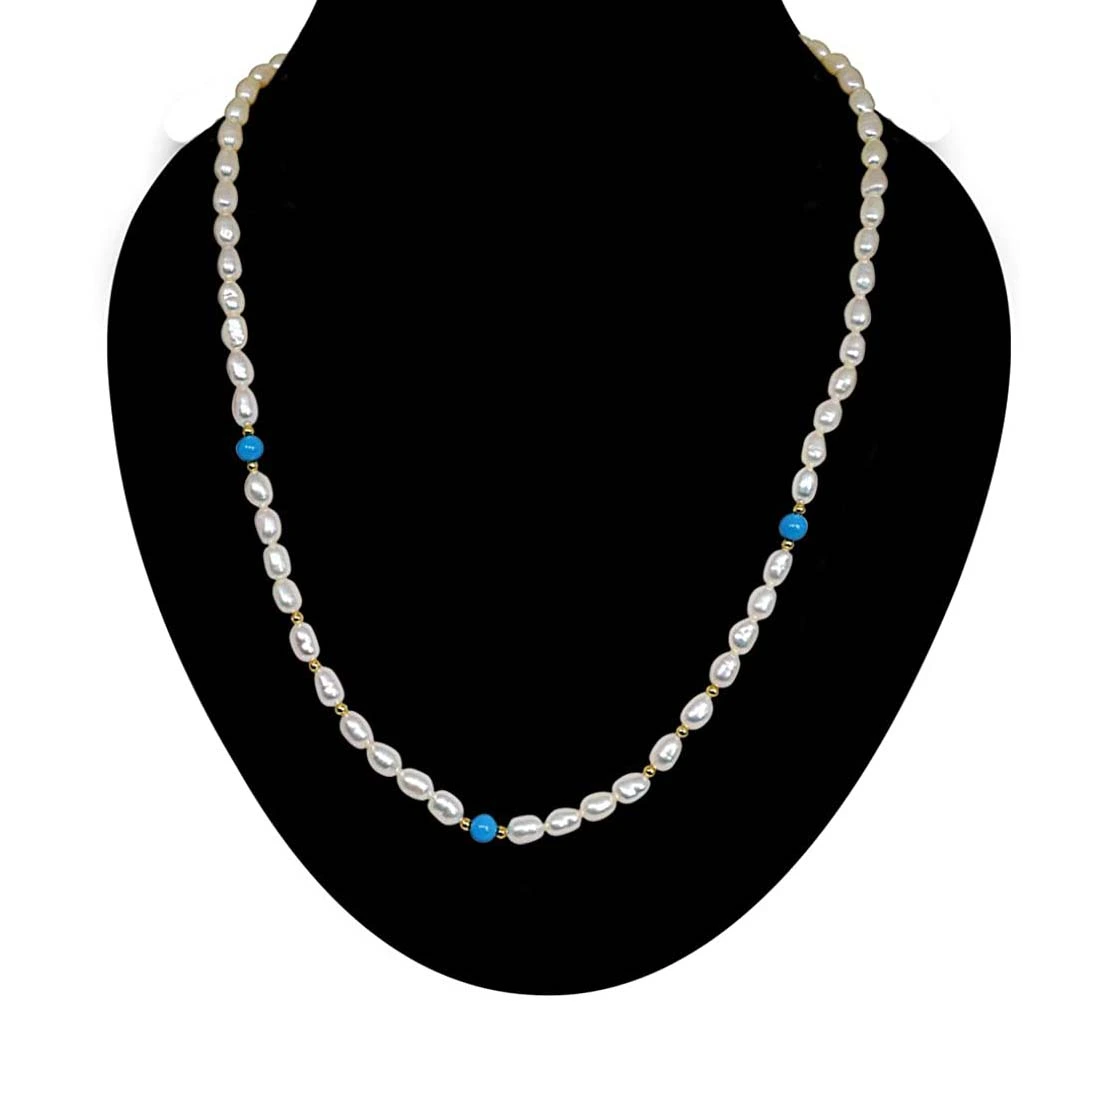 Elan - Single Line Pearl Necklace with Blue turquoise & Gold Plated Beads (SN50)